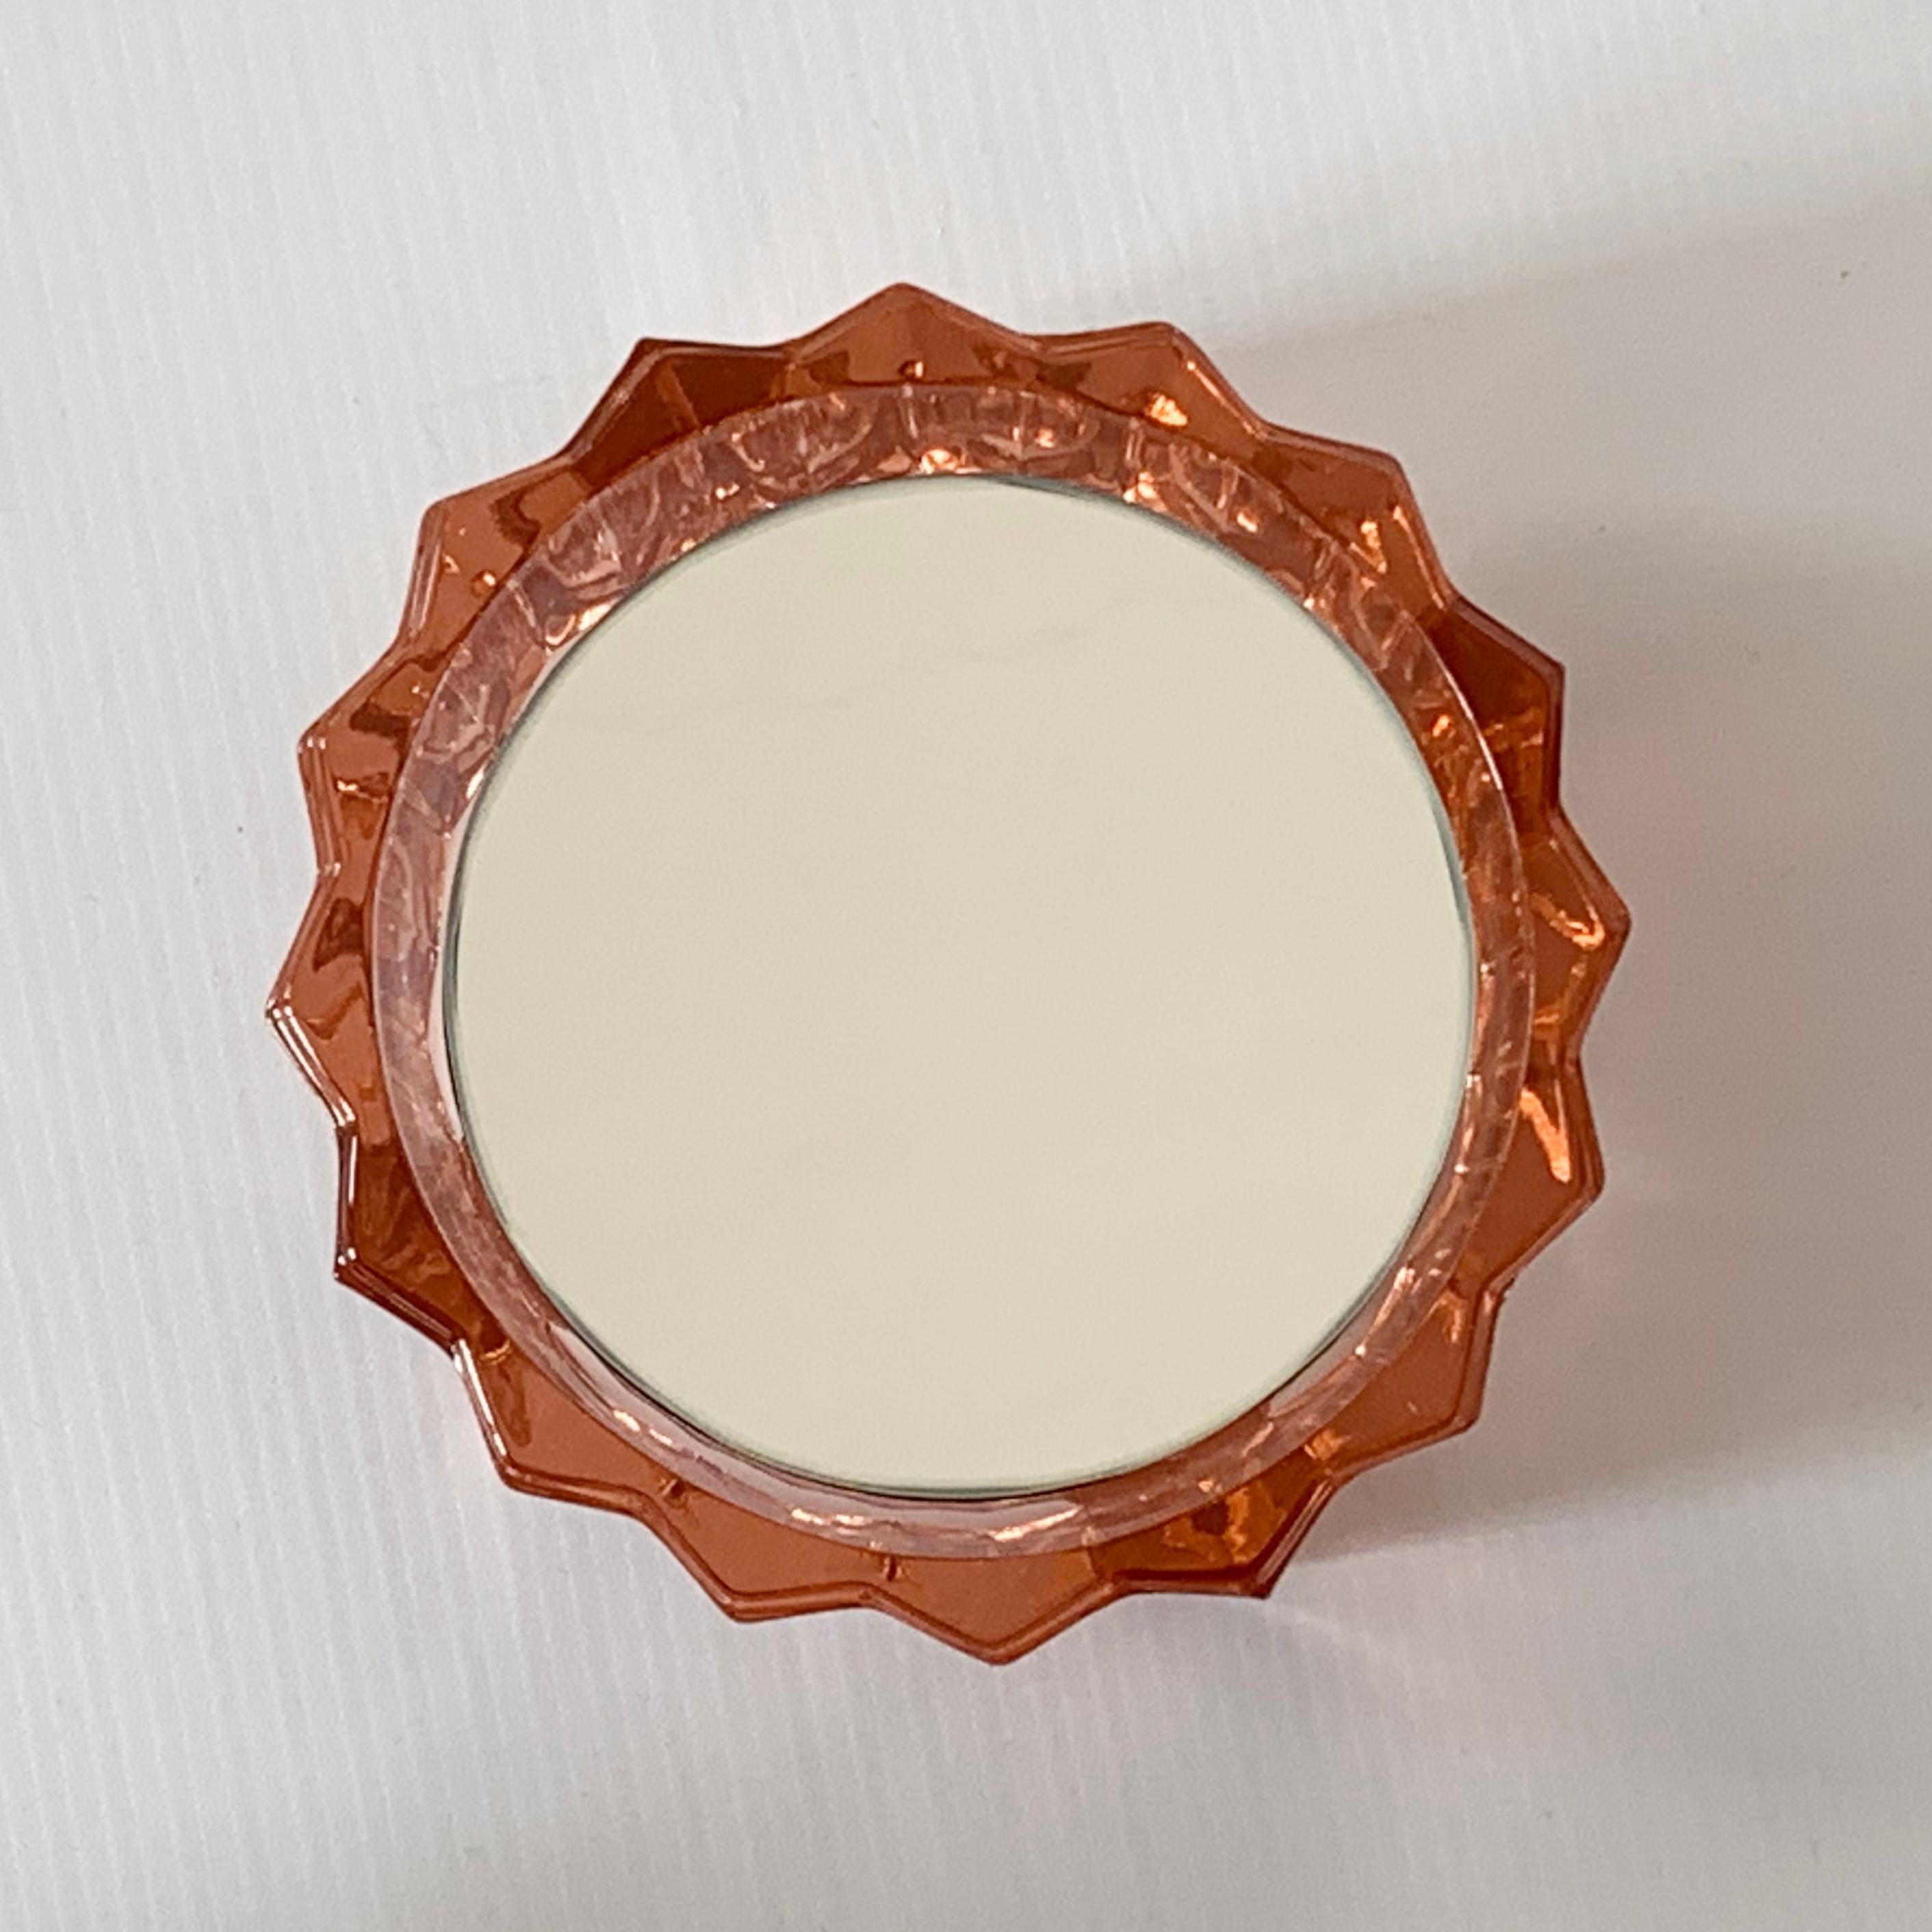 Small wall mirror (many models available: different shapes, sizes and colors). 

